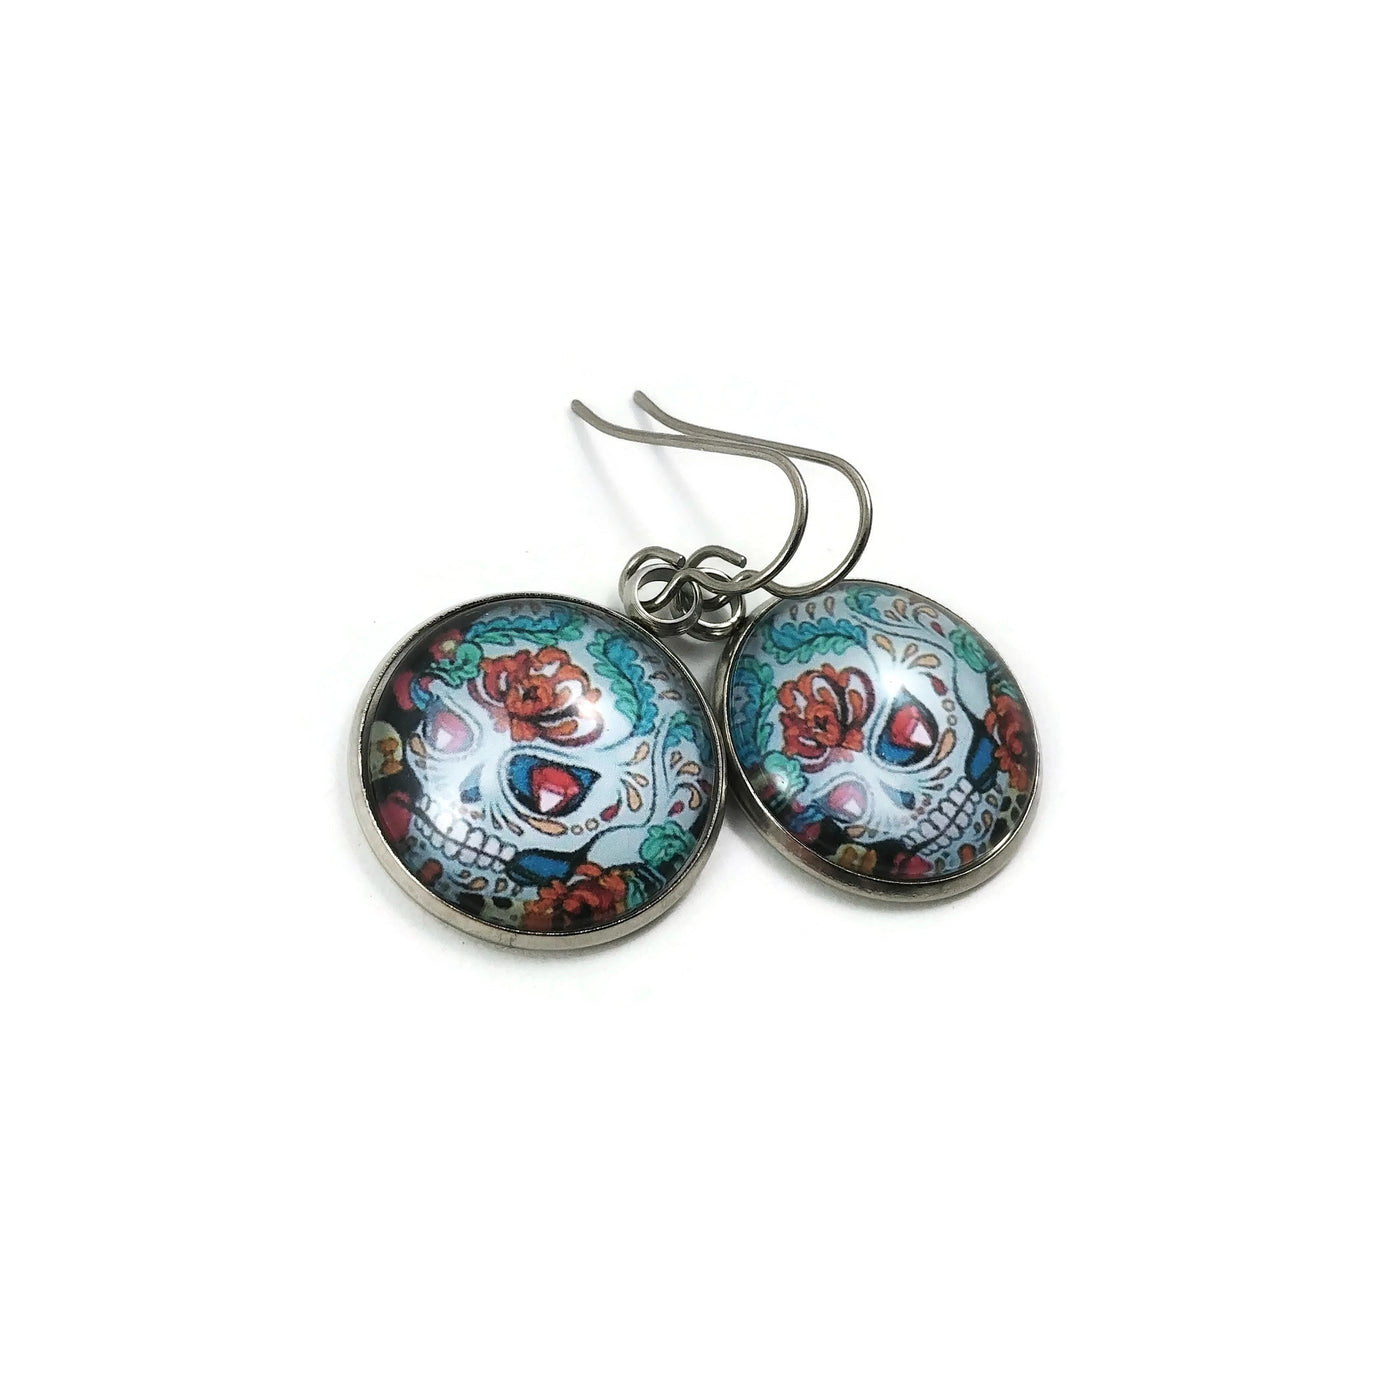 Day of The Dead sugar skull dangle earrings - Hypoallergenic pure titanium, stainless steel and glass jewelry